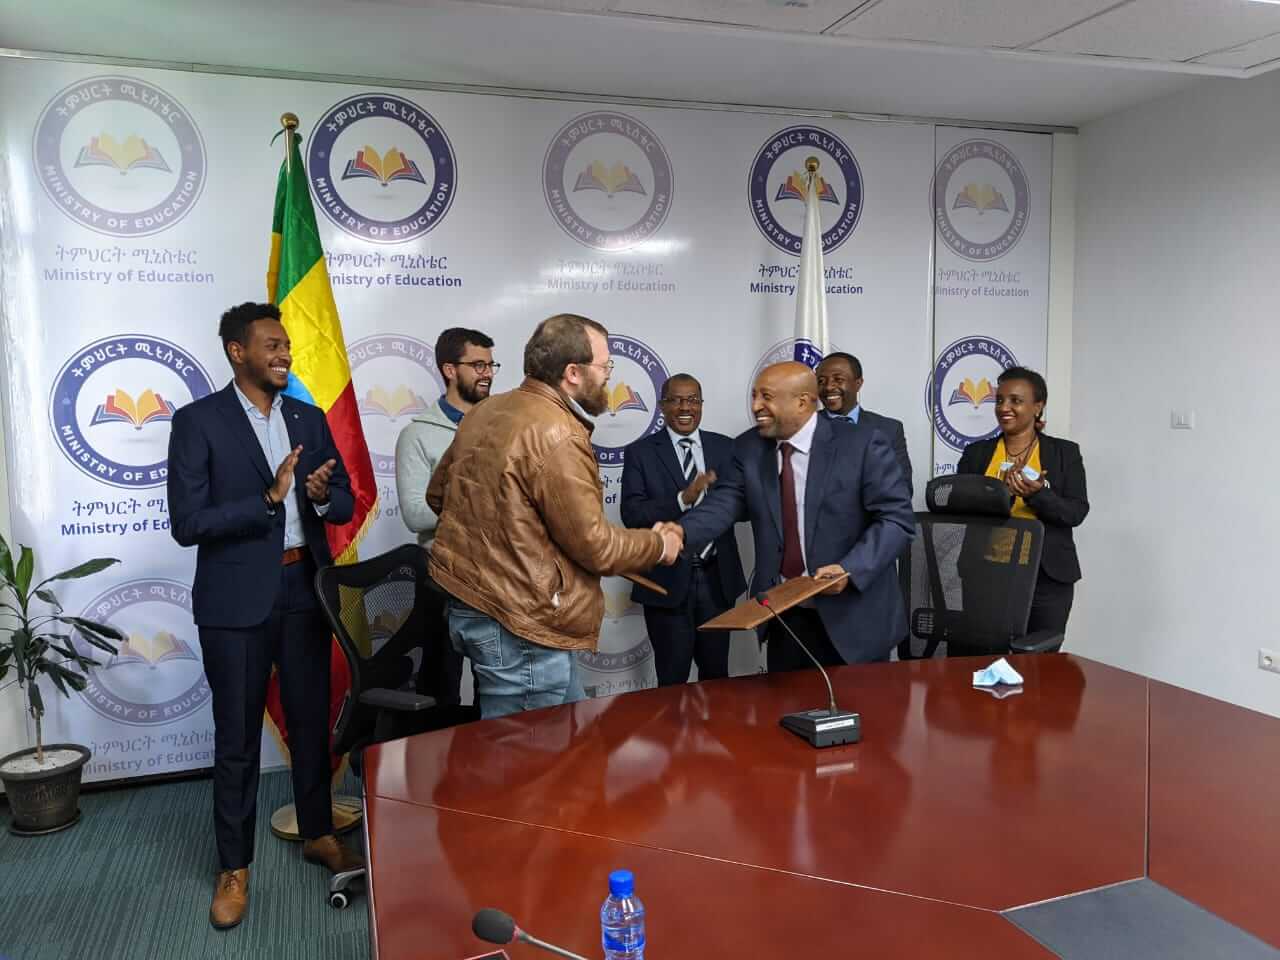 Cardano (ADA) is on track with its “digital transformation” of Ethiopia